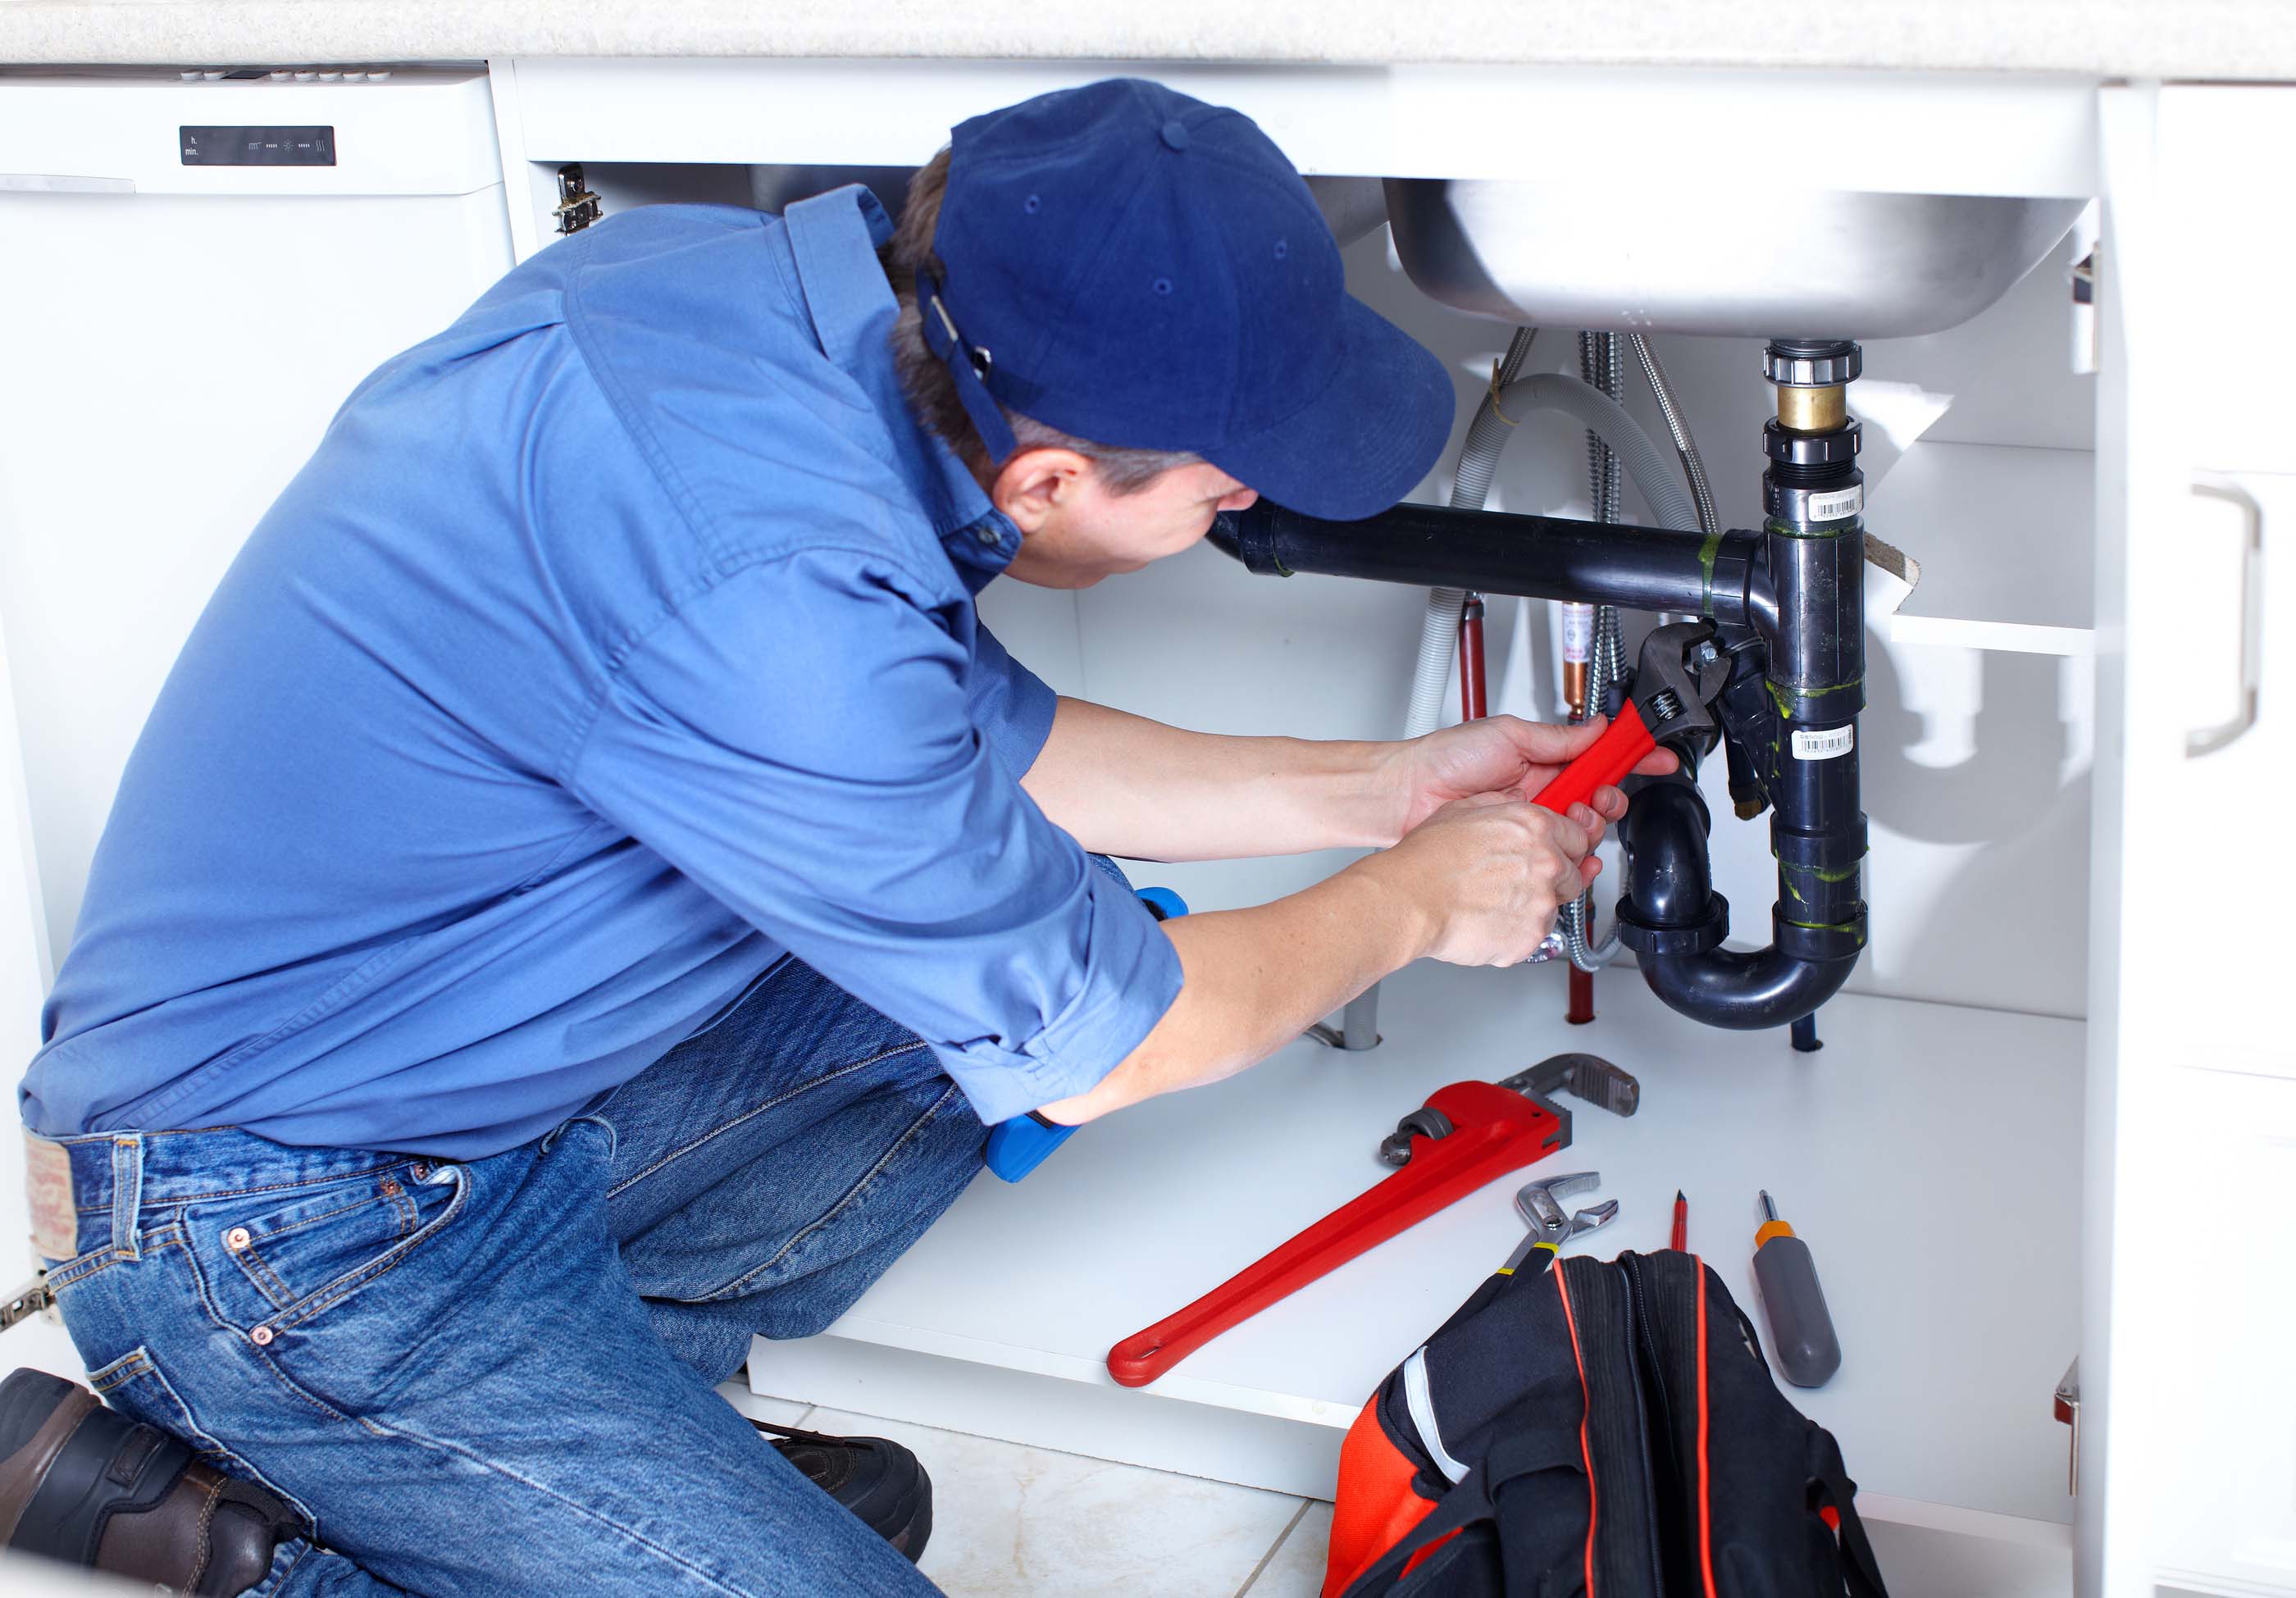 Make Sure Your Plumbing Systems Are in Peak Condition